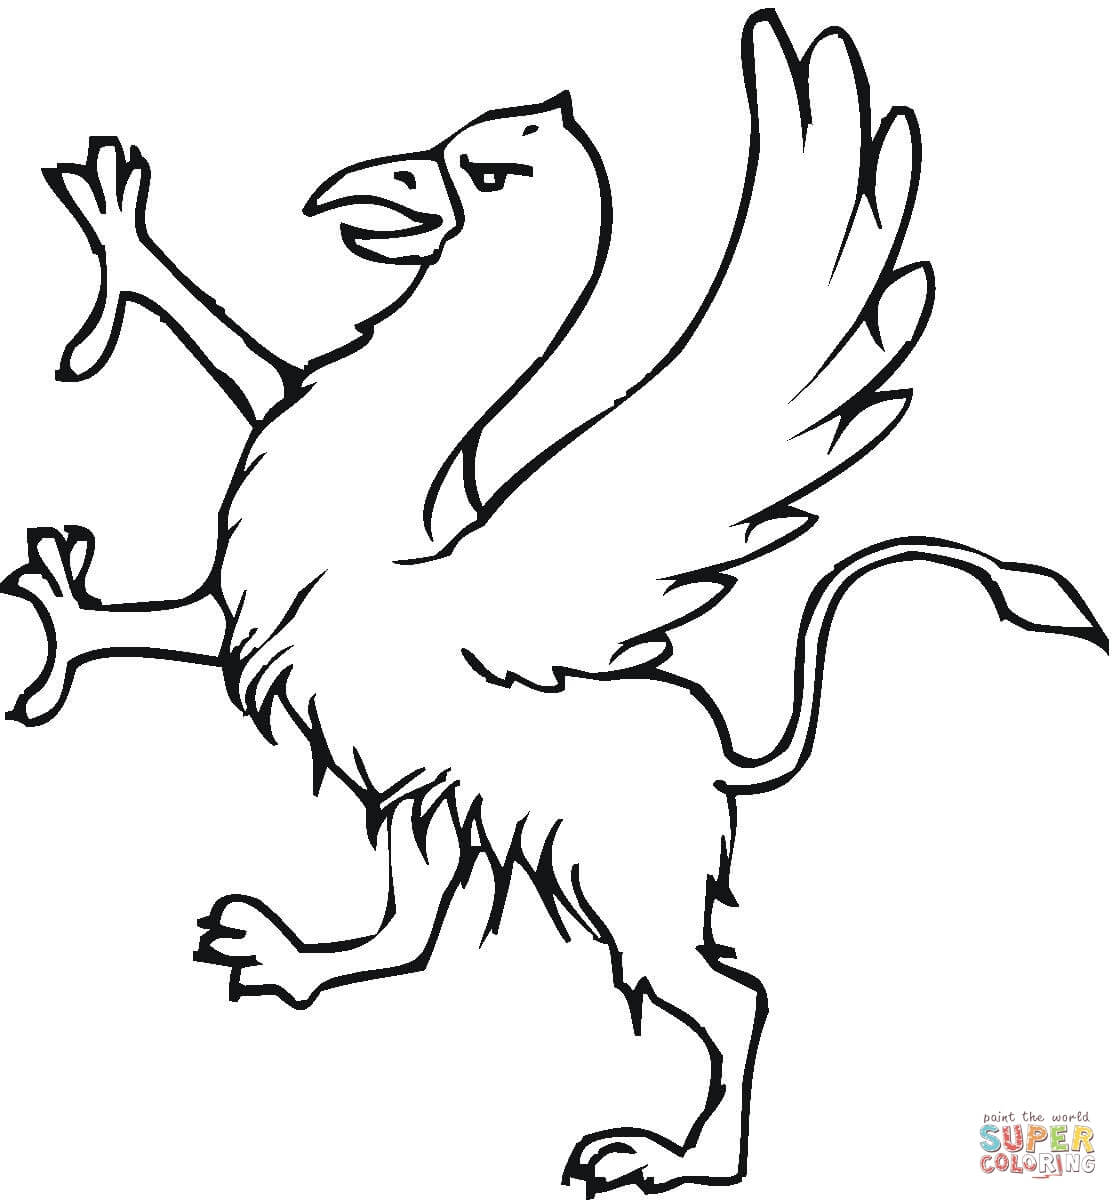 Griffin coloring #13, Download drawings